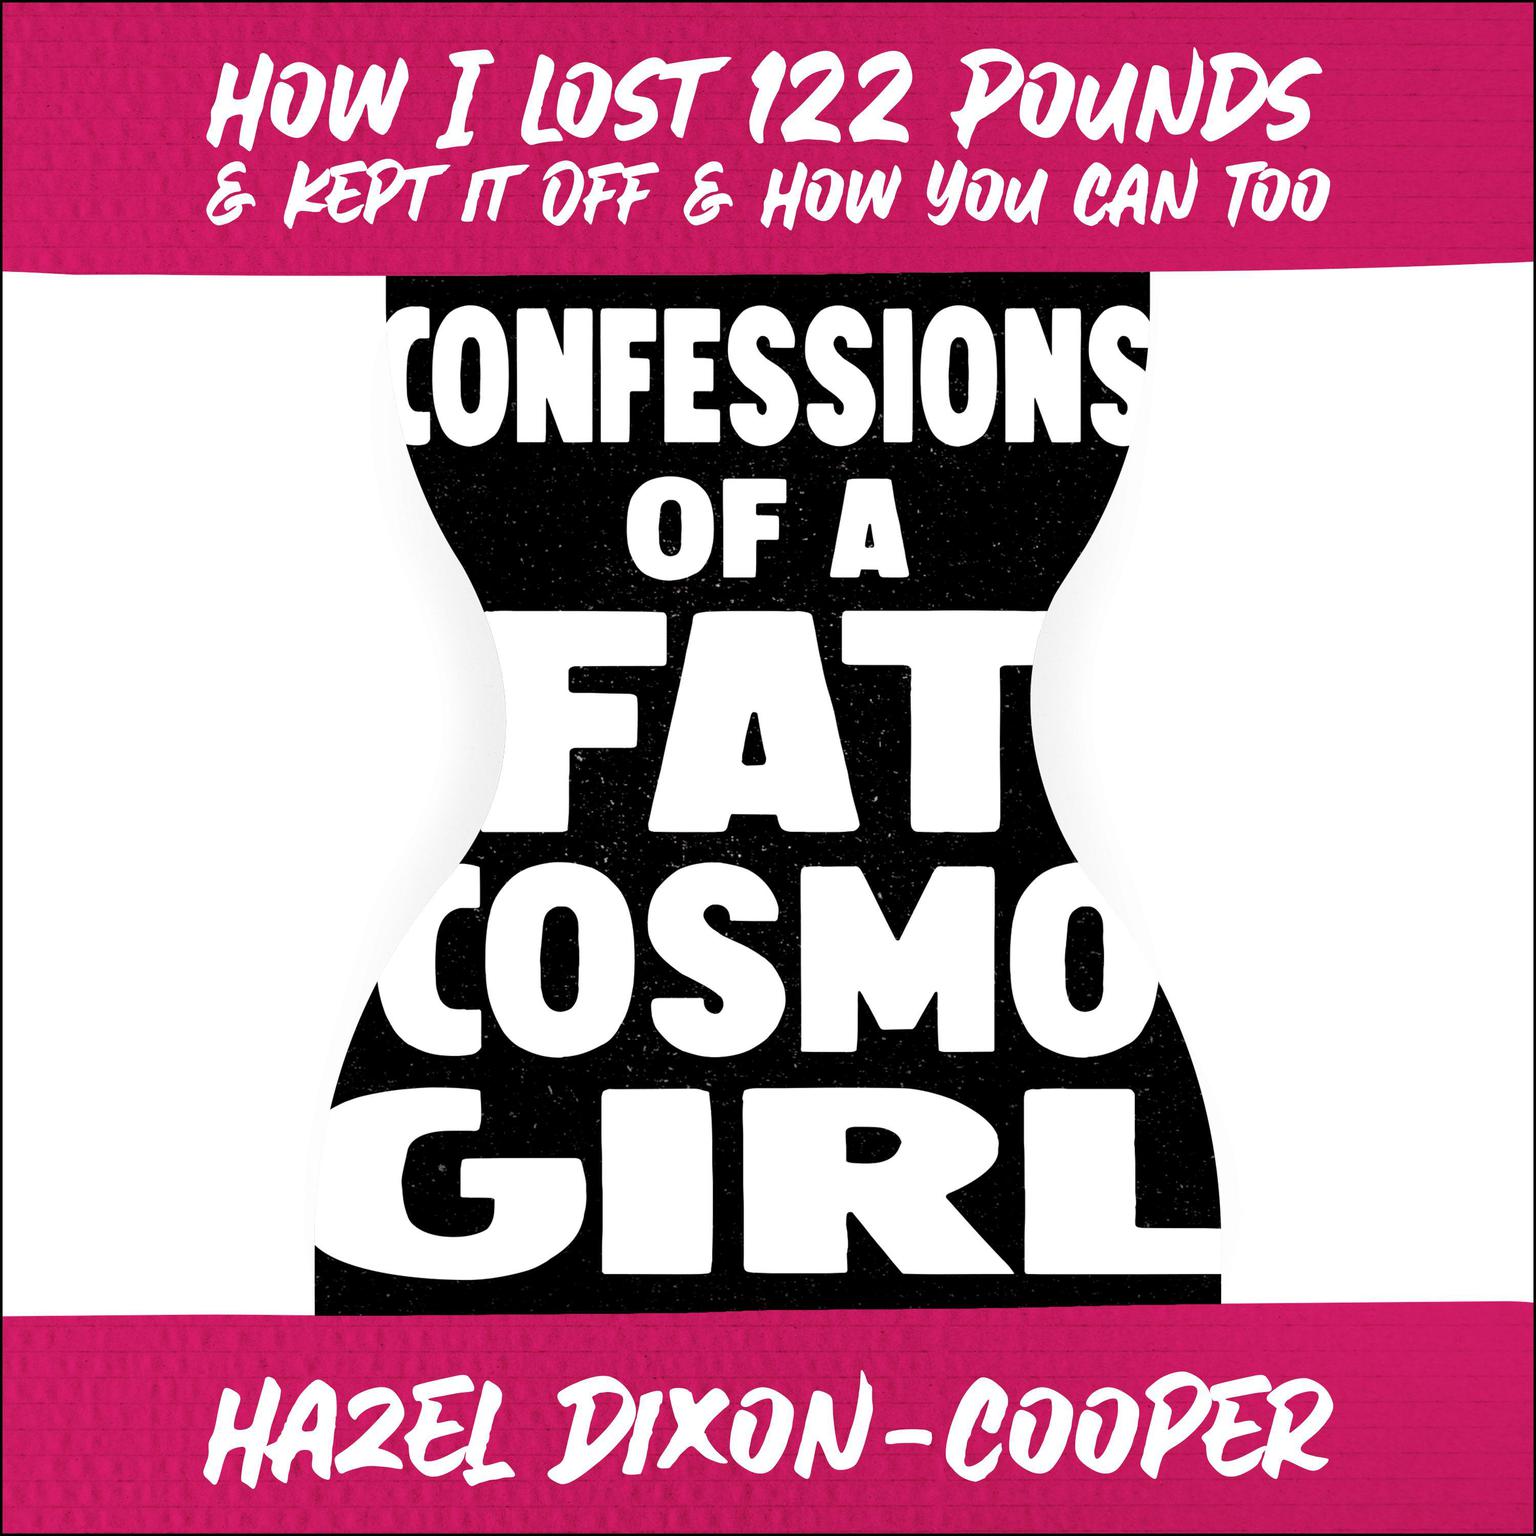 Confessions of a Fat Cosmo Girl: How I Lost 122 Pounds & Kept it Off & How You Can Too Audiobook, by Hazel Dixon-Cooper